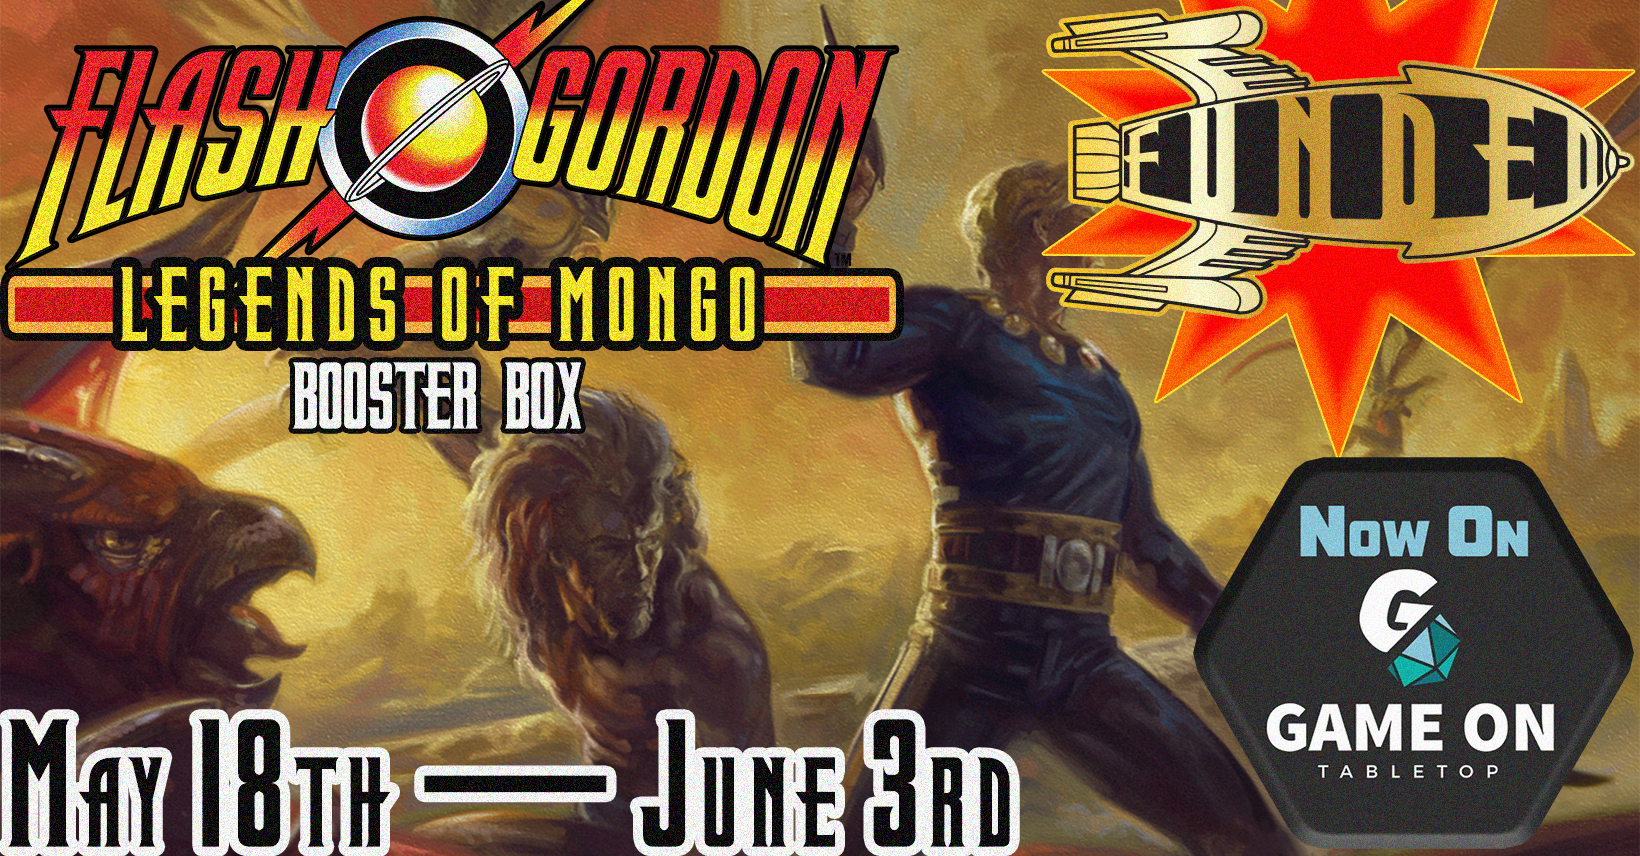 Flash Gordon: Legends of Mongo. May 18 to June 3rd.